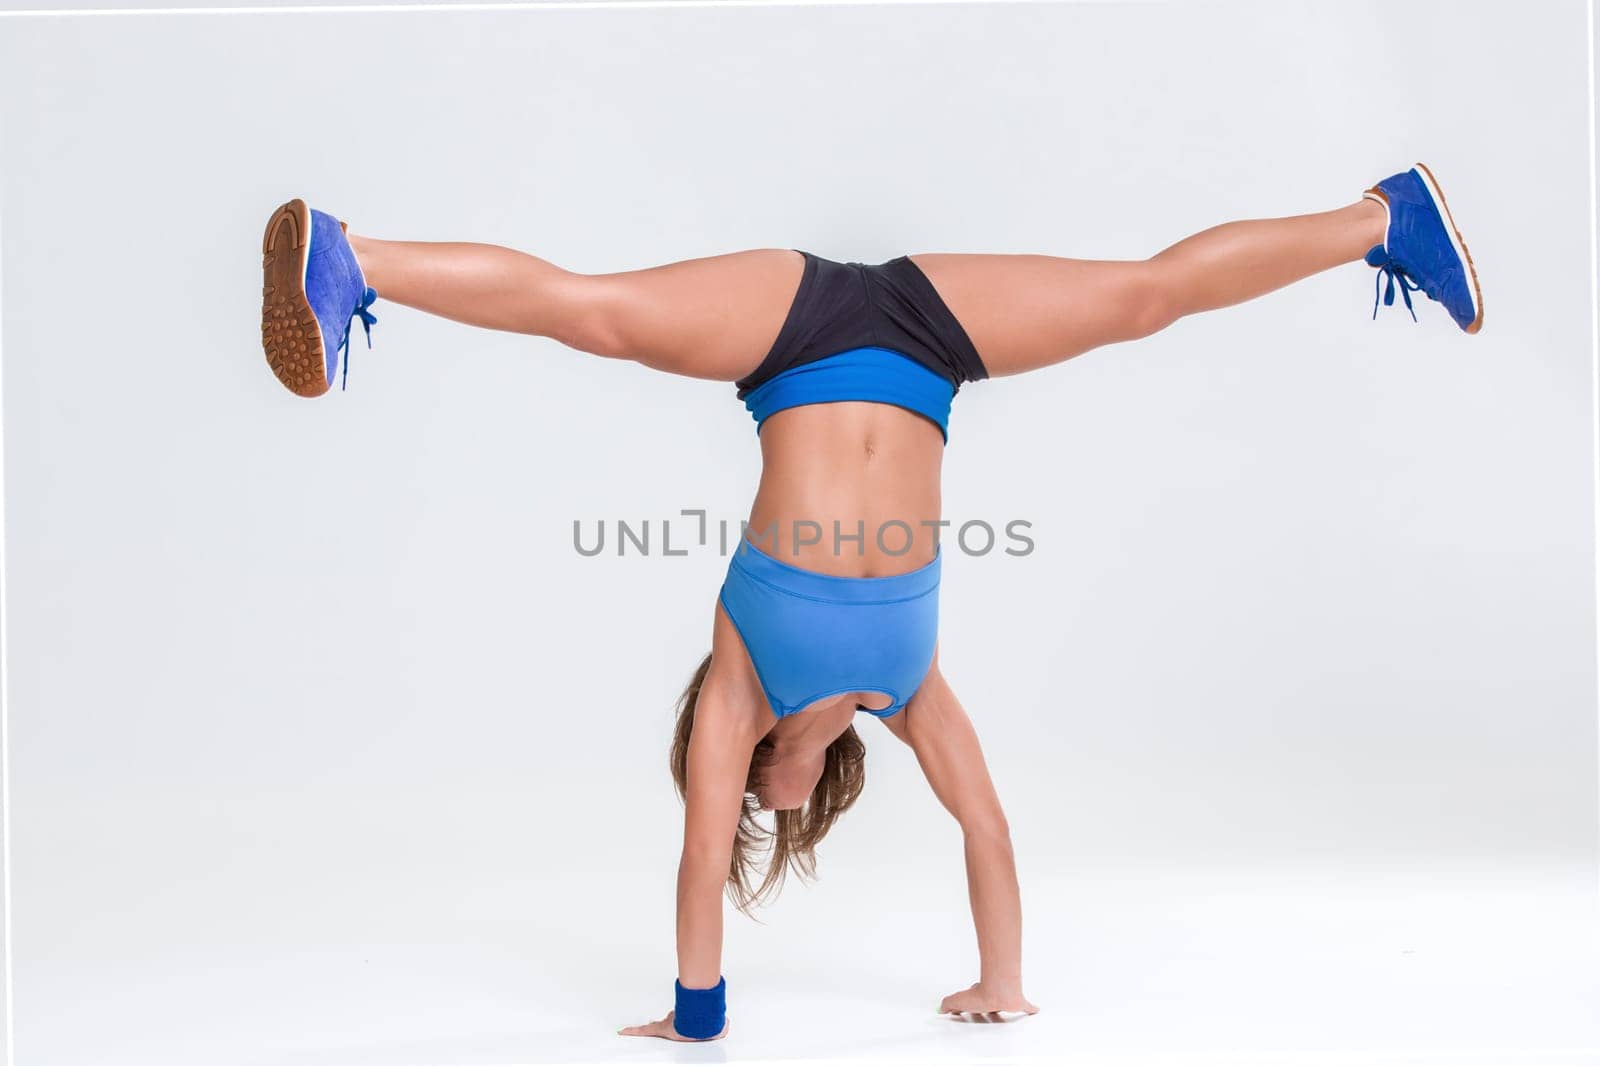 Sport and active lifestyle. Sporty flexible girl fitness woman in blue sportswear doing stretching exercise on light background.